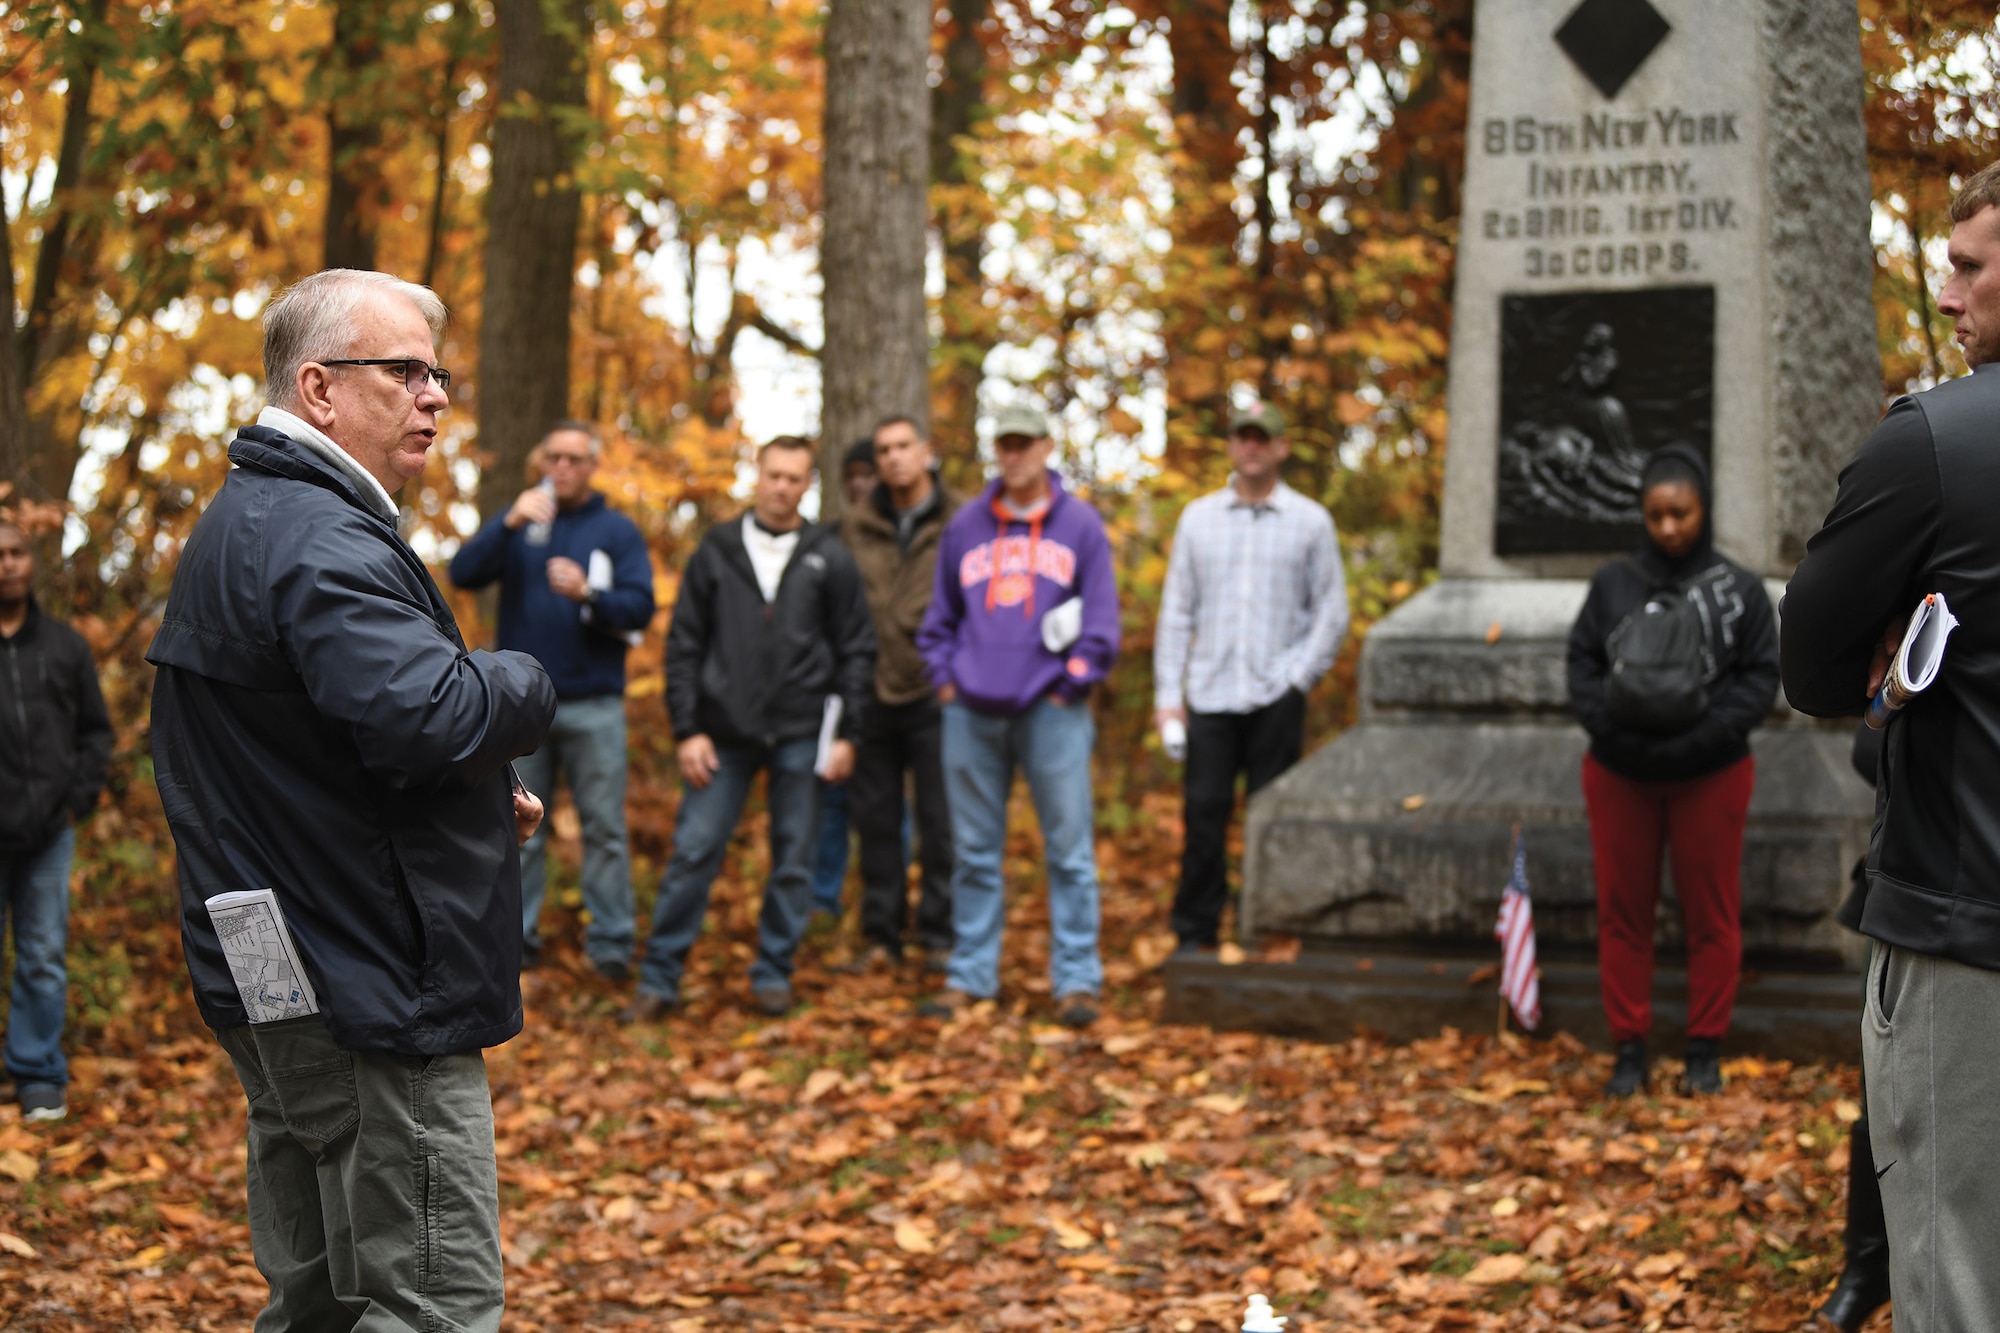 Col. Donald Wren, 445th Mission Support Group commander, addresses military members at the New York 86th Infantry monument during the Gettysburg staff ride, Oct. 26, 2022 at Gettysburg, Pennsylvania. Reserve Citizen Airmen from Wright-Patterson Air Force Base, Ohio; Minneapolis-St. Paul Air Reserve Station; Joint Base Charleston, South Carolina; Youngstown Air Reserve Station, Ohio; and Westover Air Reserve Base, Massachusetts; ventured to the historic battlegrounds of Gettysburg to reflect on what it means to be a leader.